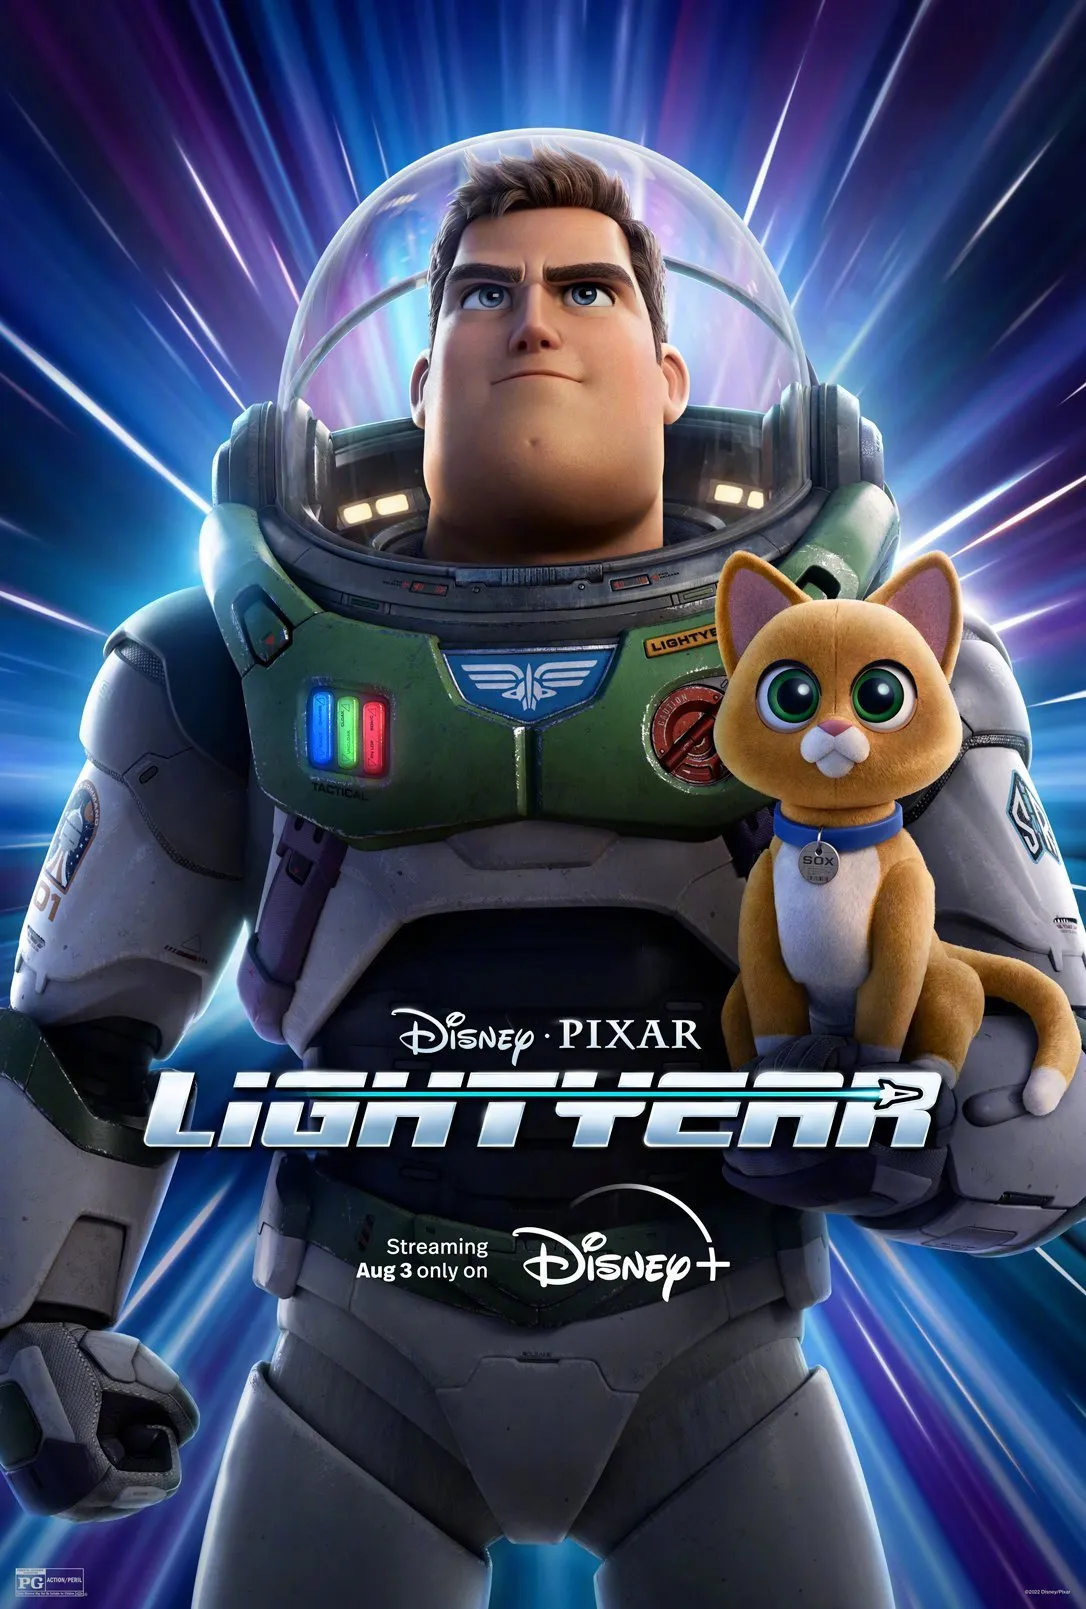 'Lightyear' announced to launch on Disney+ on August 3 | FMV6